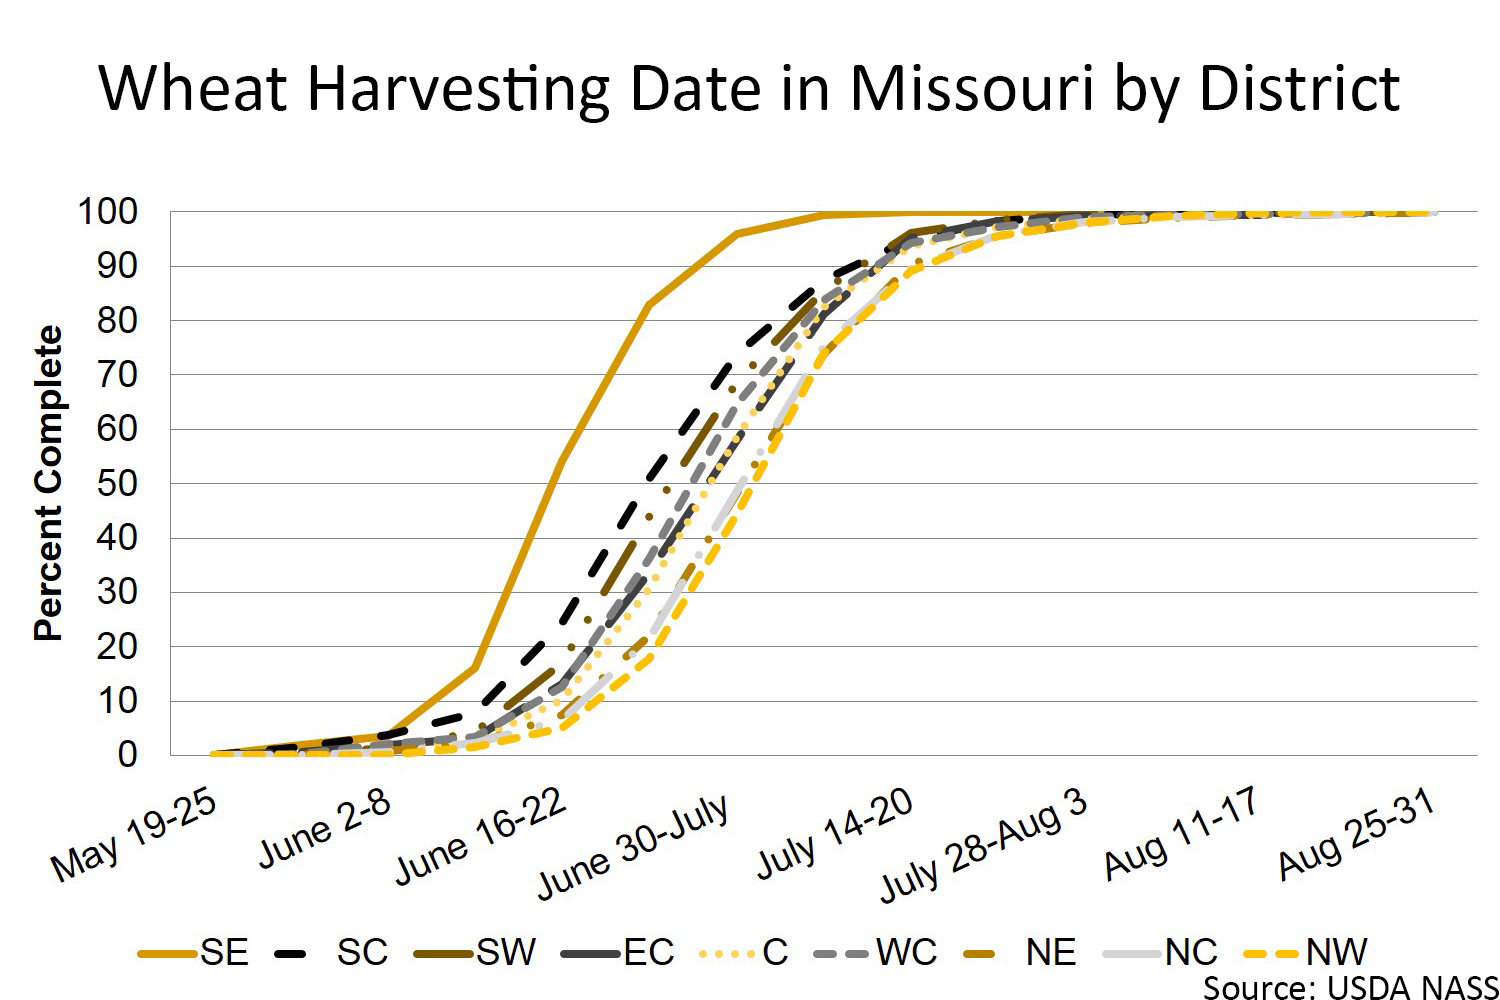 Missouri wheat harvesting date by district chart